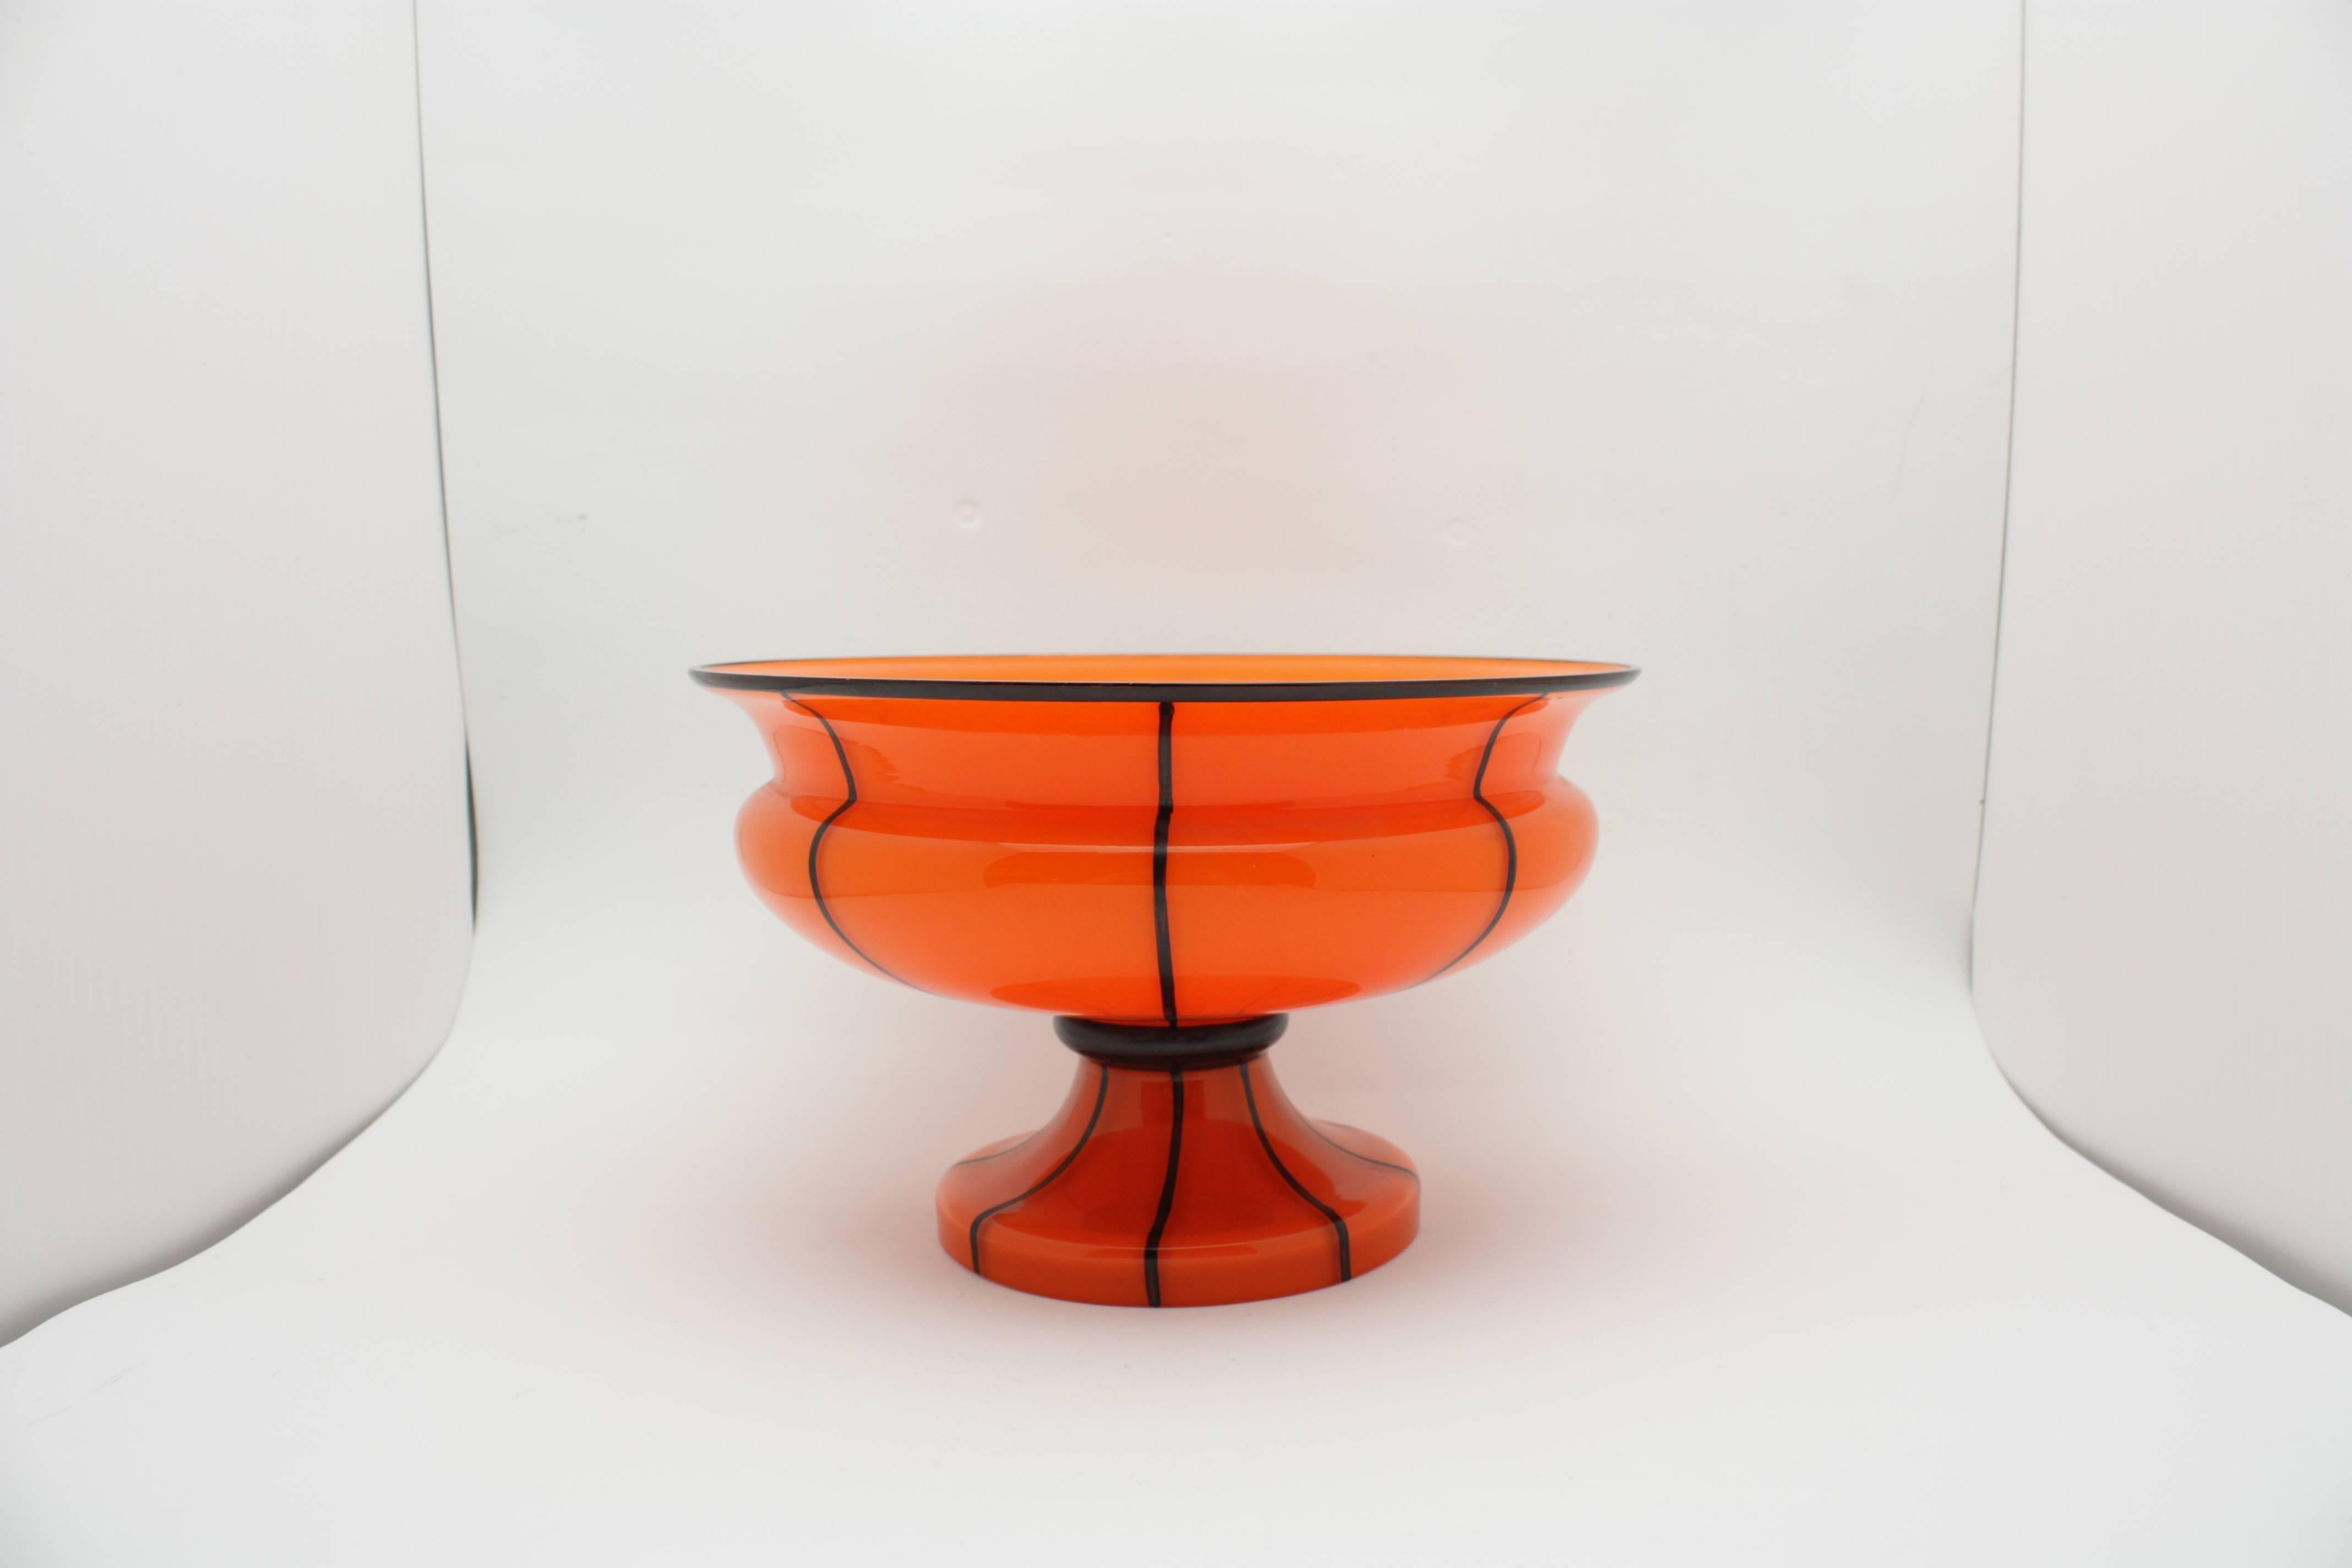 Michael Powolny (Austrian, 1871-1954), a Loetz compote. Cased glass compote in orange glass with clear glass over. Black enameled vertical striped along the exterior.